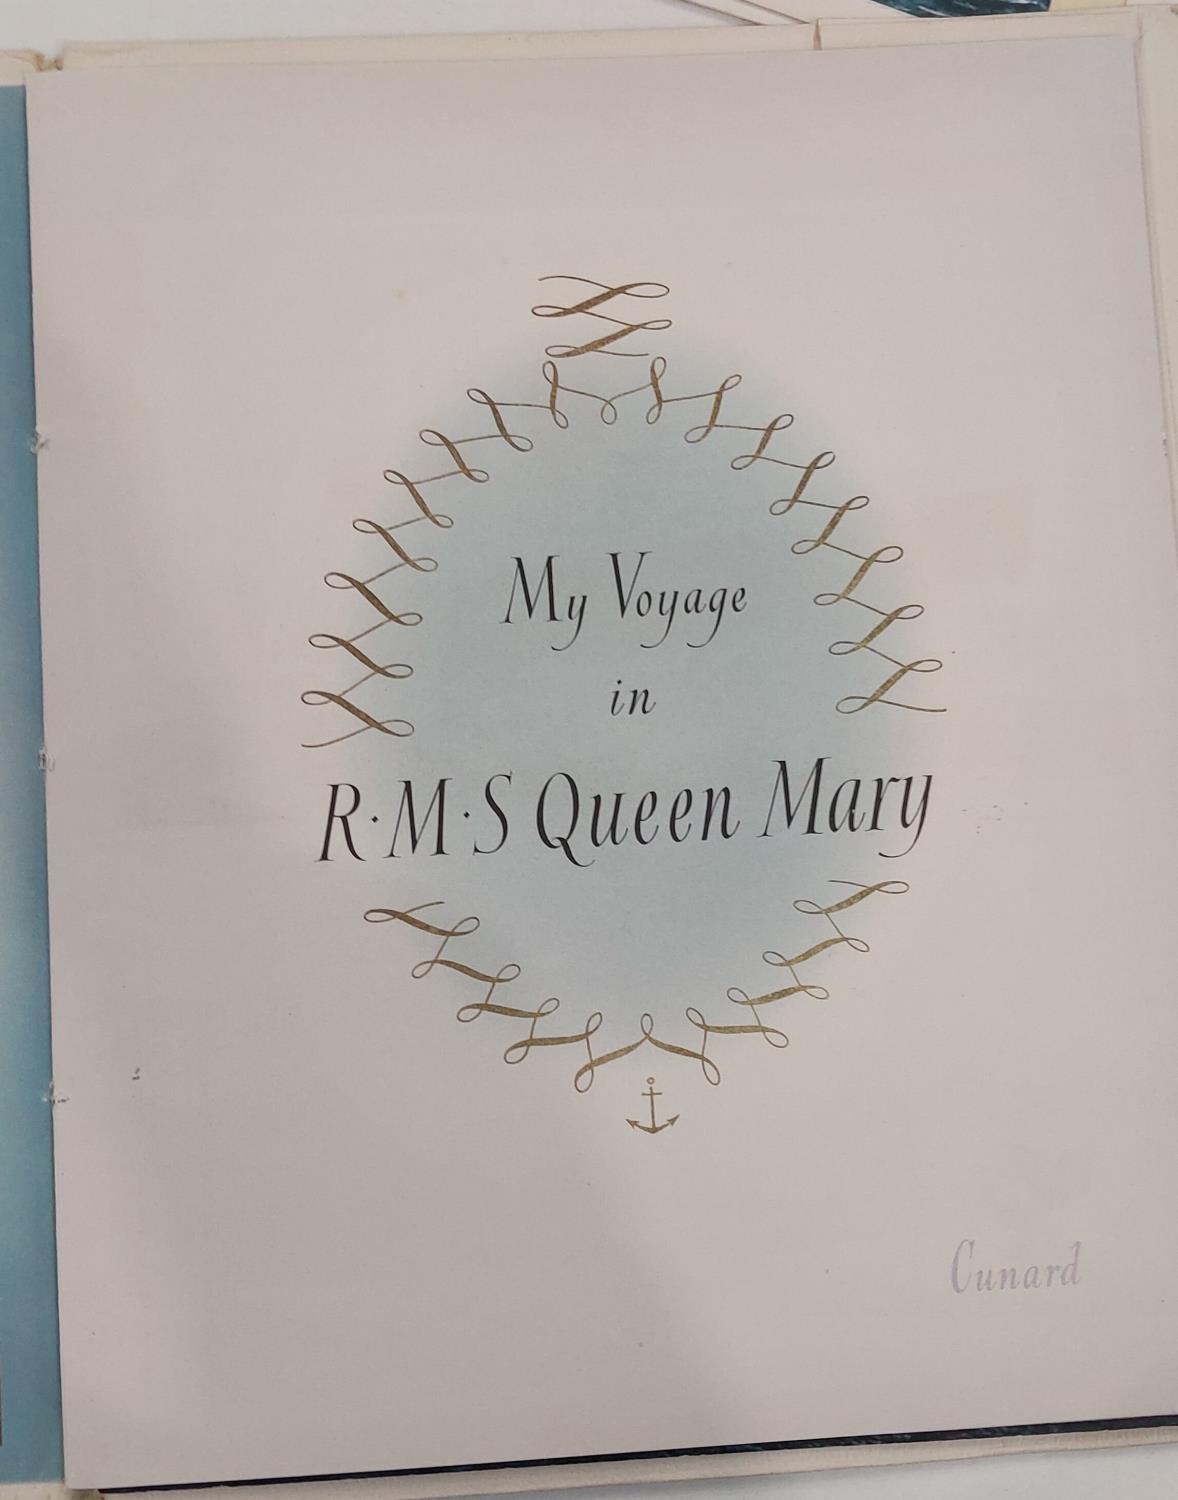 RMS Queen Mary: My Voyage with menu card, 1964, another book and ephemera - Image 2 of 2